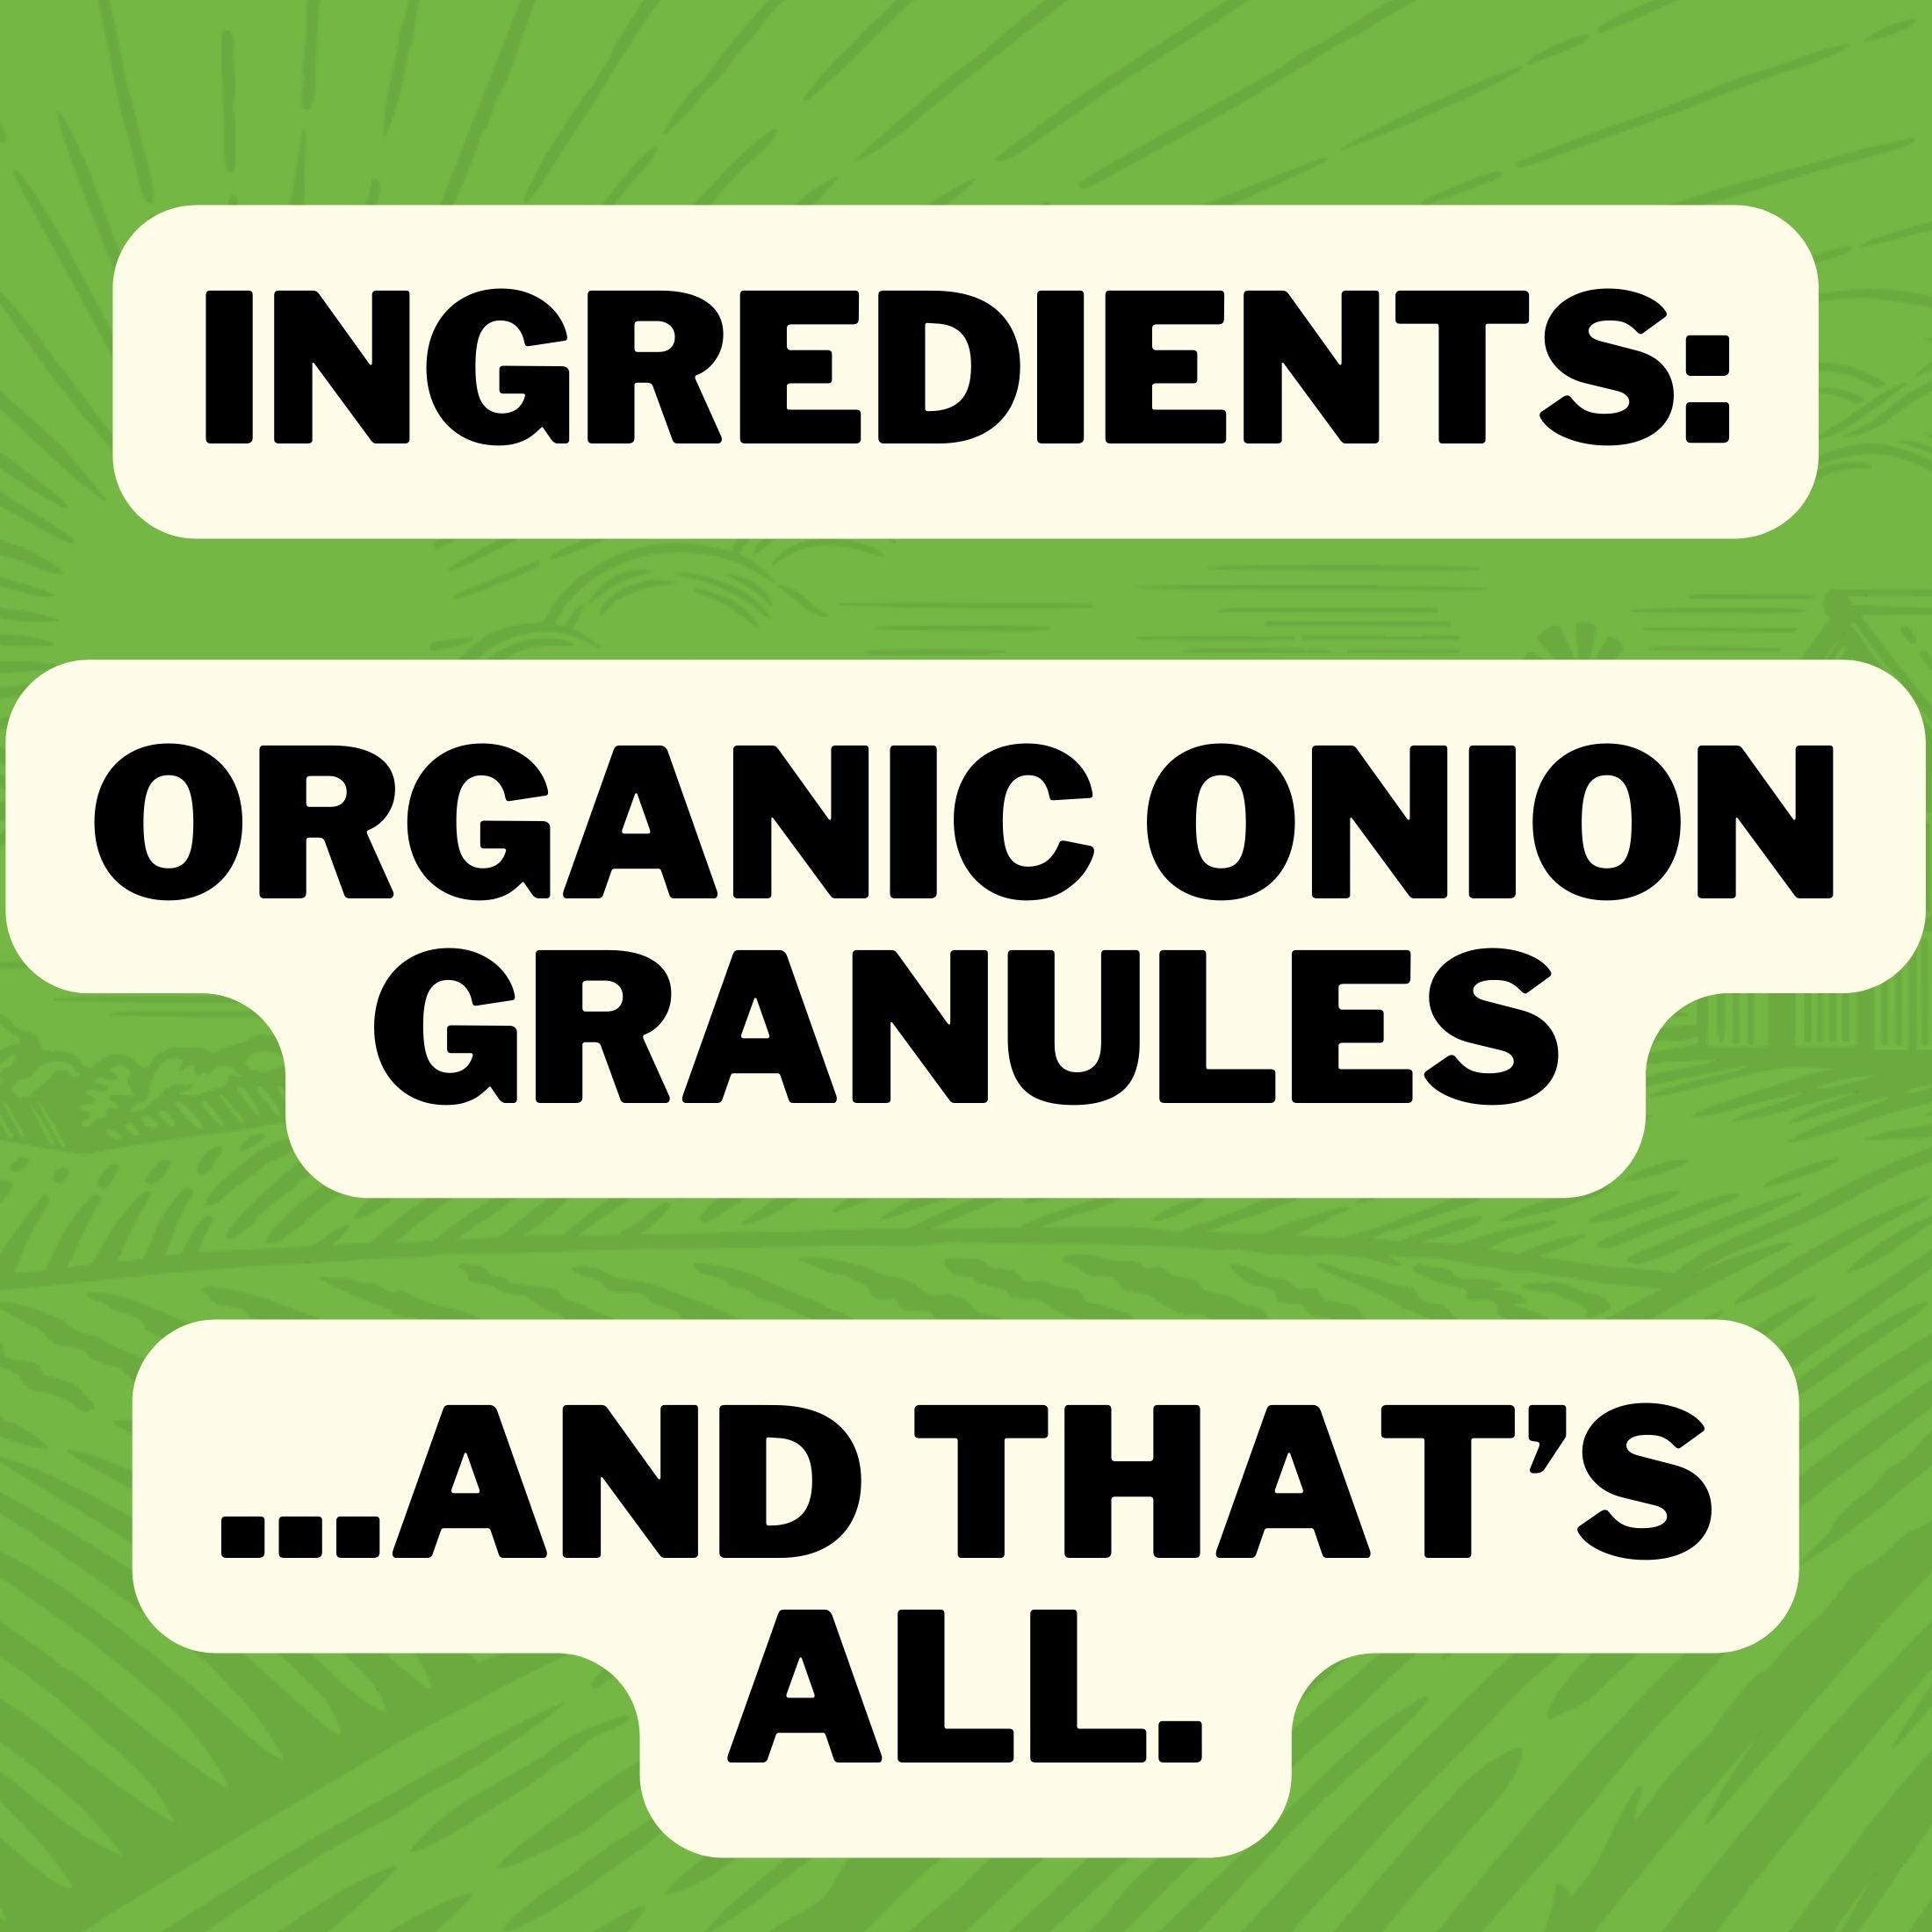 Inregients: Organic Onion Granules ... And That's All